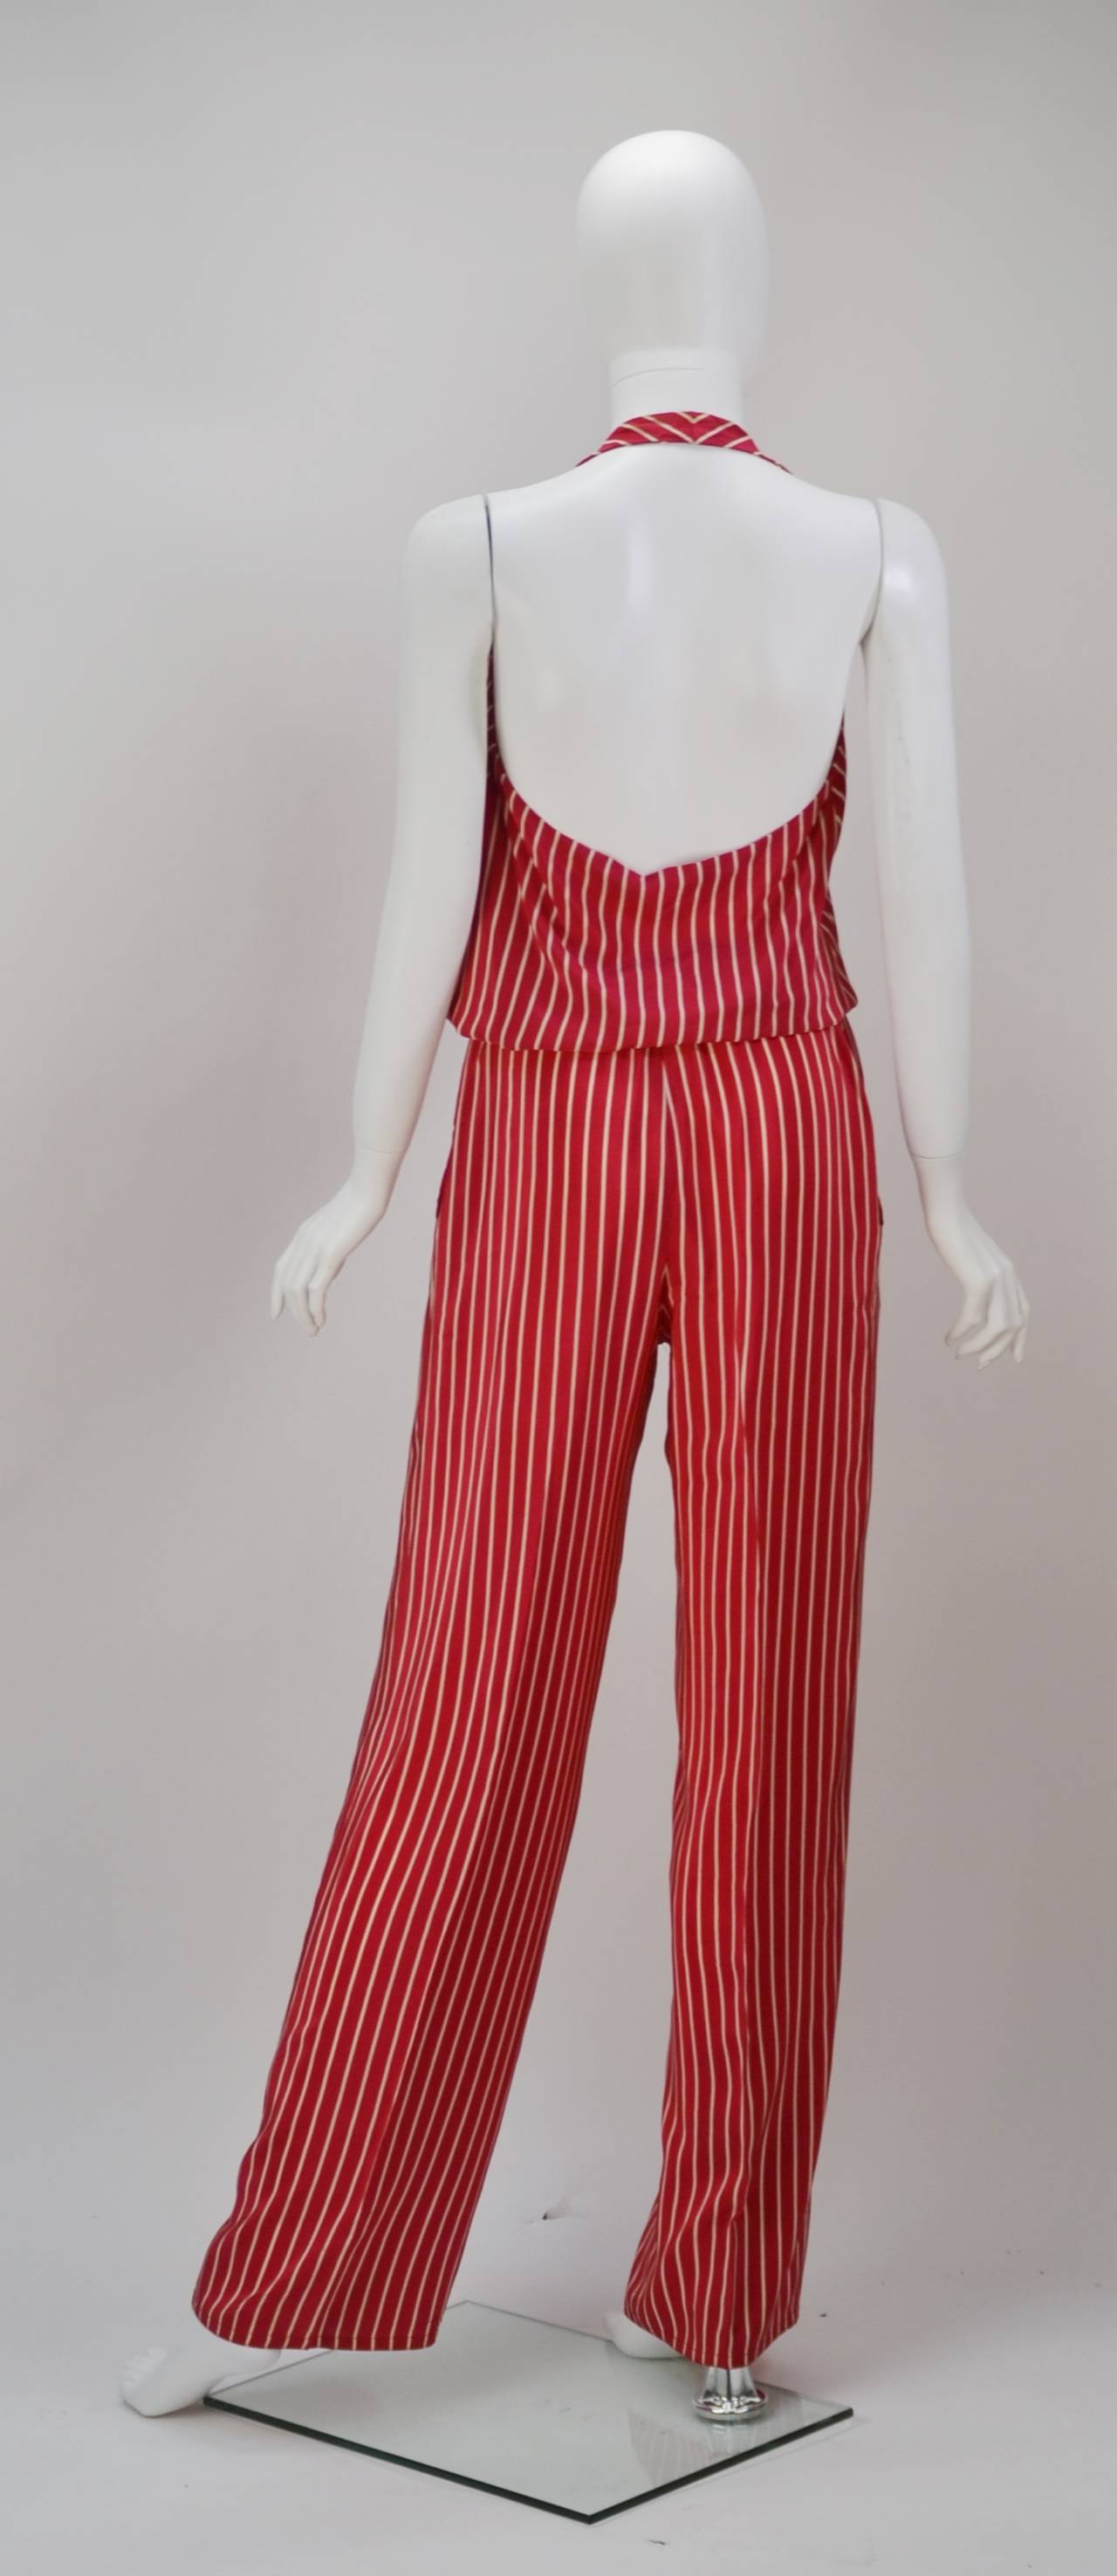 This fun and nautical look halter pantsuit was created by Coty award winner, Herbert Kaspar in the latter half of the 1970's.  Kasper studied at Parsons and moved to Paris where he worked with the Jacques Fath, Christian Dior, and Marcel Rochas.  He